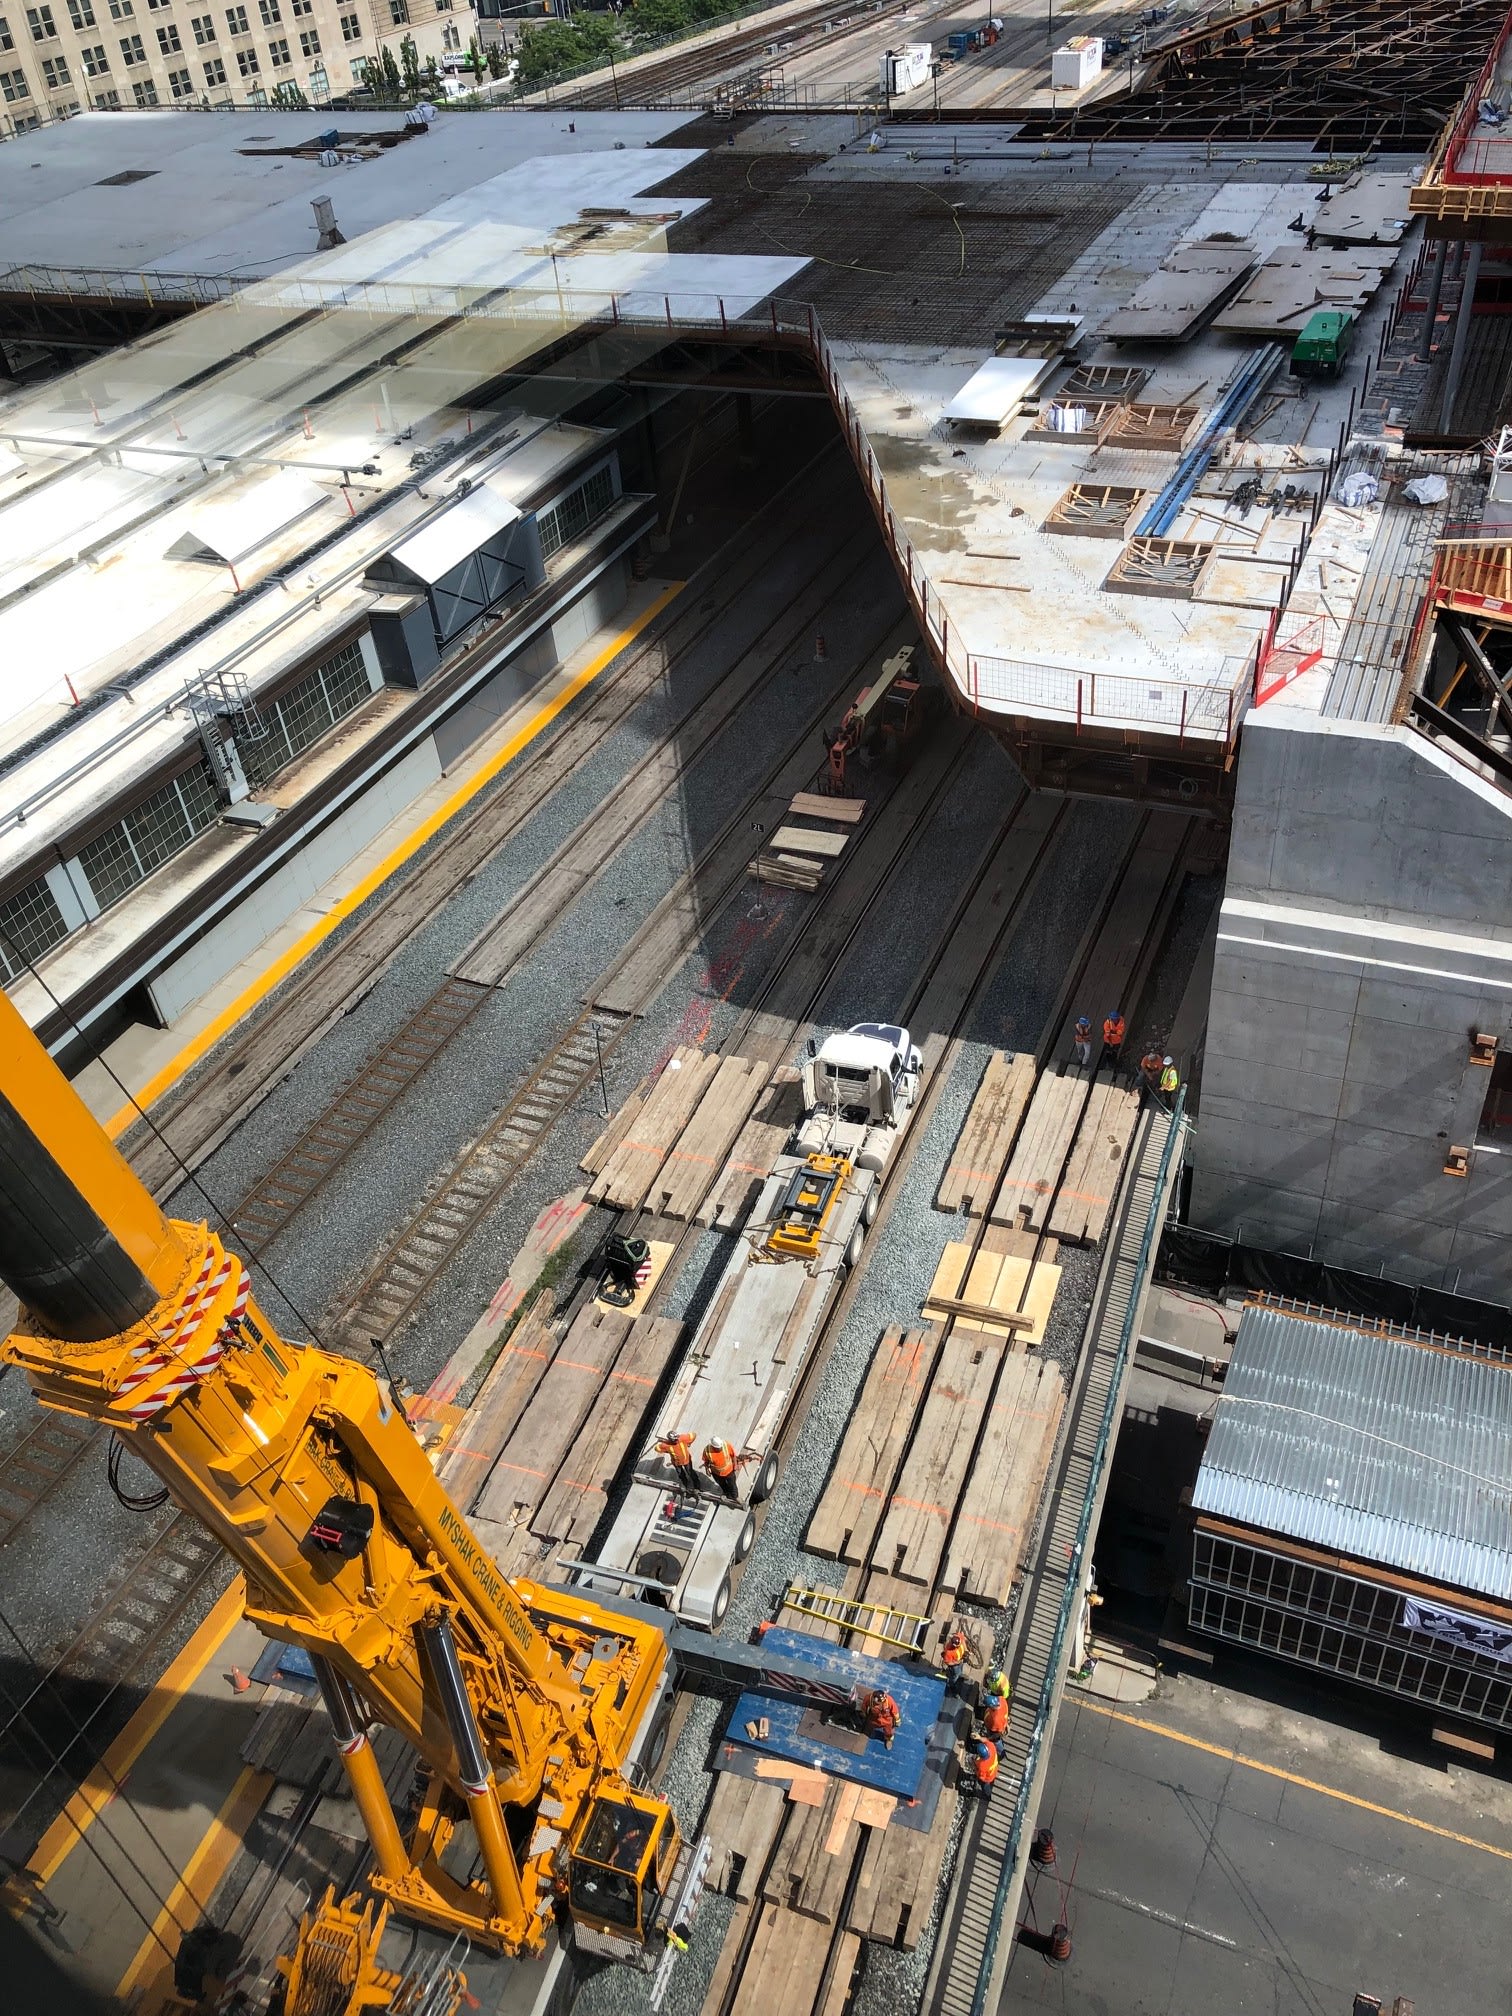 A view from high above a crane, as it looks down on crews.